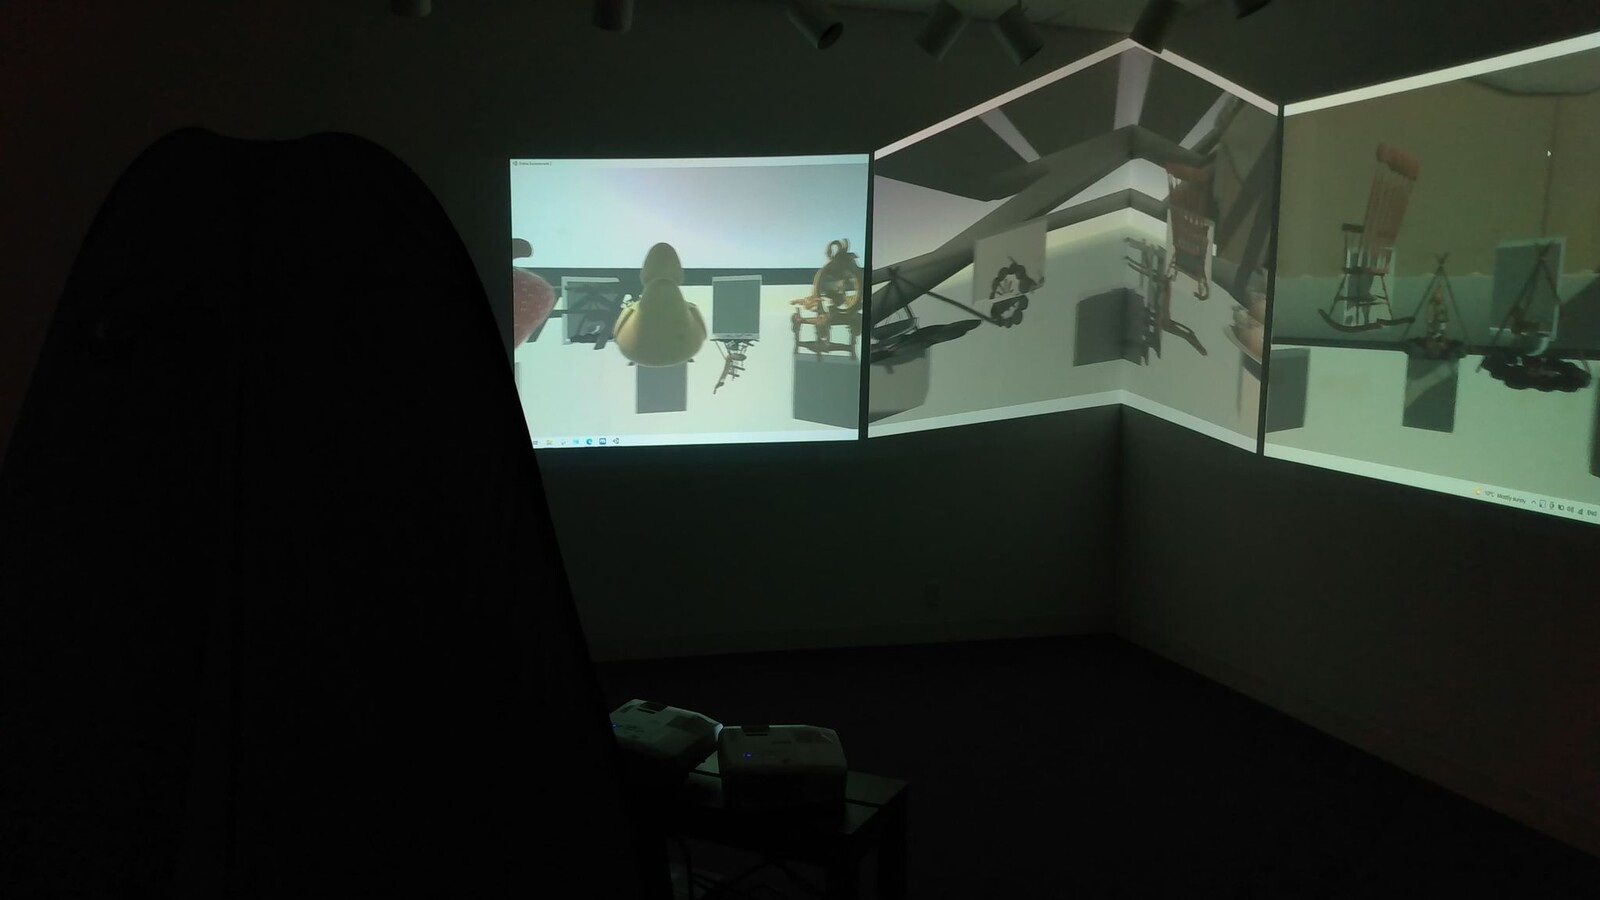 A version of the project where the scene with spawned objects is projected alto the walls, and users can either use a provided mobile device or their own device to add items to the scene.